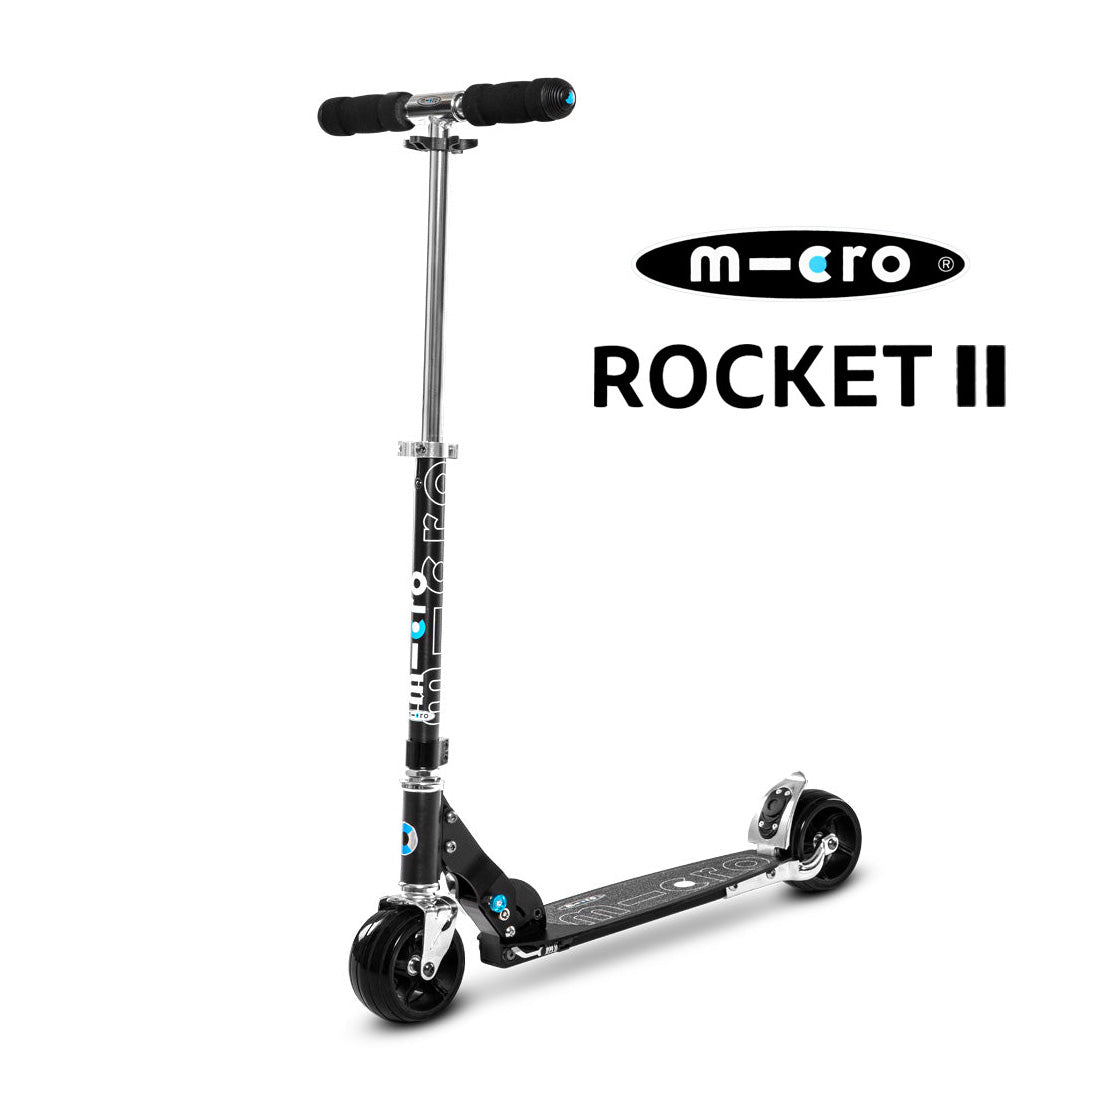 Micro Rocket II Scooter - Black Scooter Completes Rec